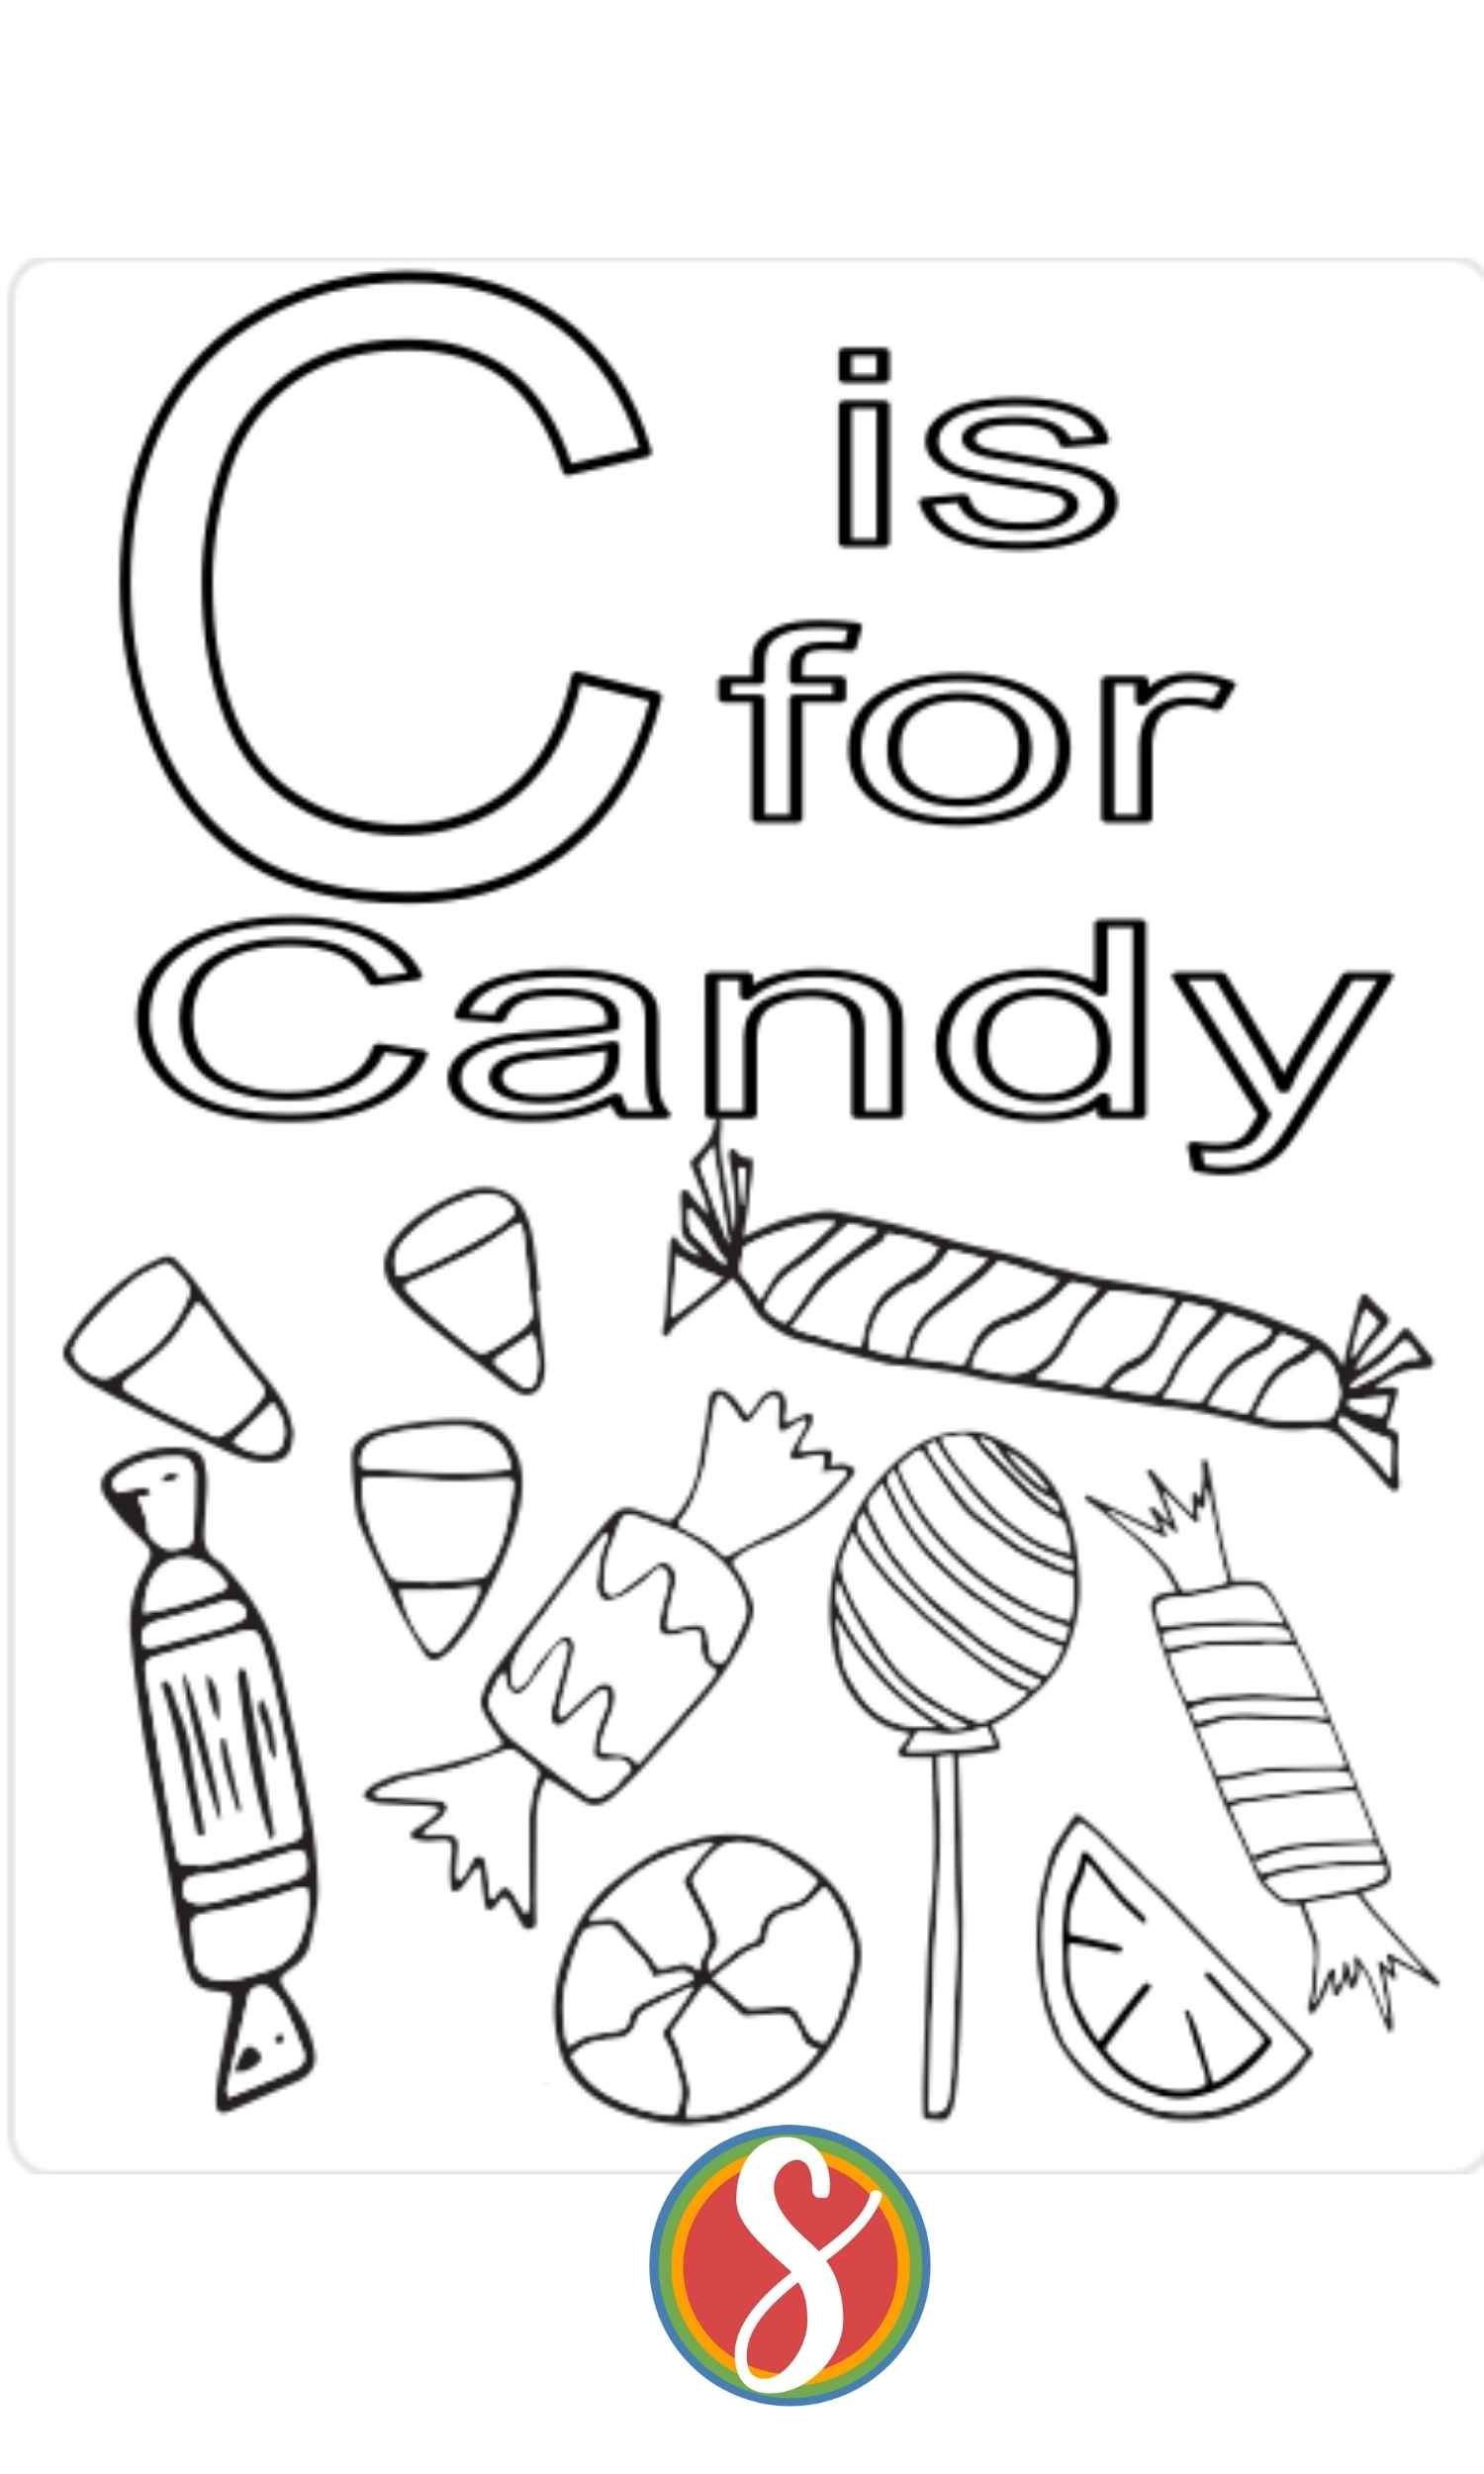 c is for candy text with candy drawings  underneath to color